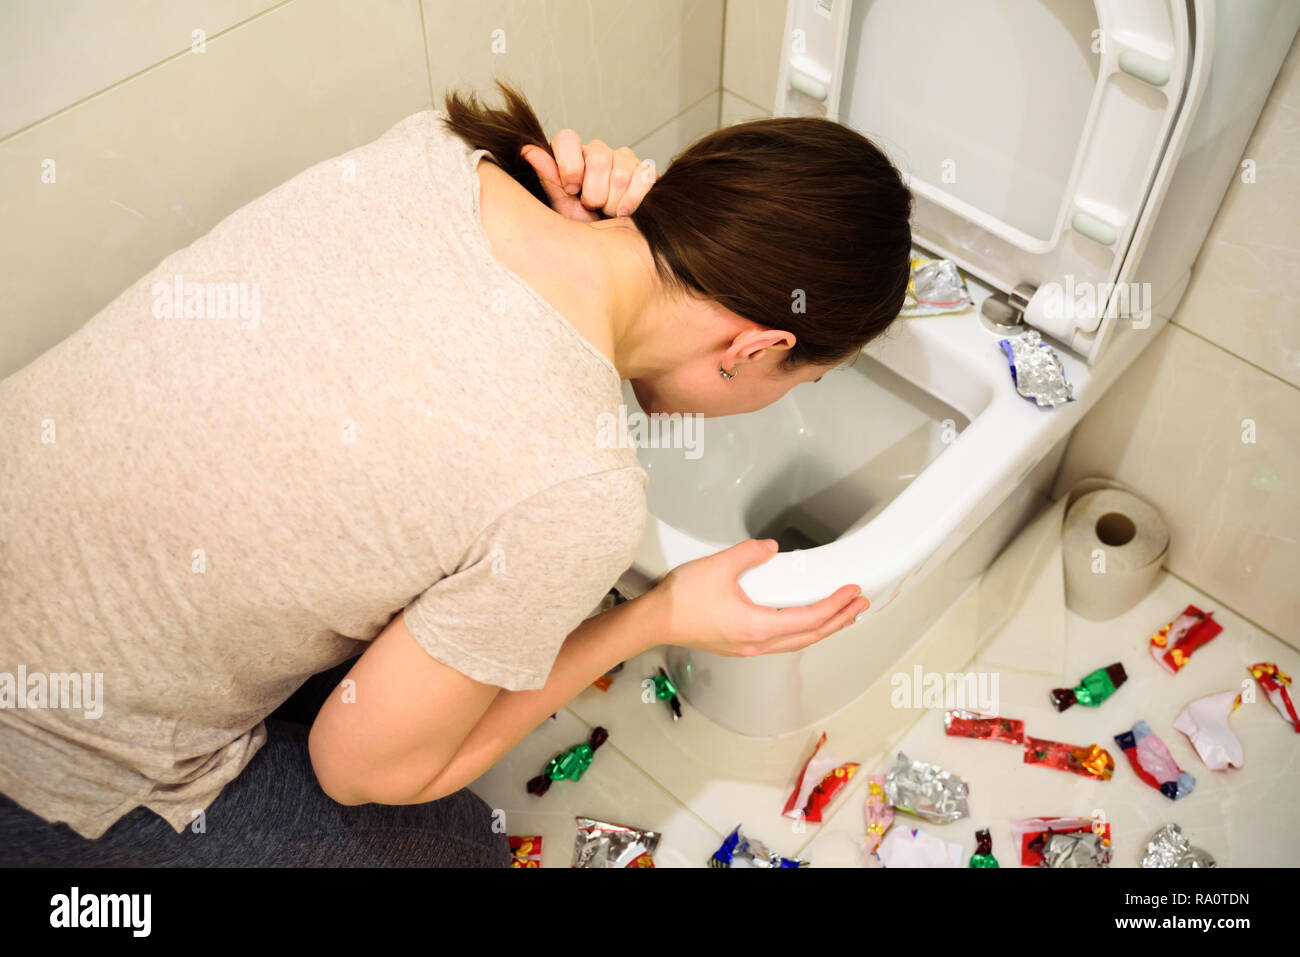 Young woman vomiting while binge eating of candies. A lot of candy wrappers on floor Stock Photo